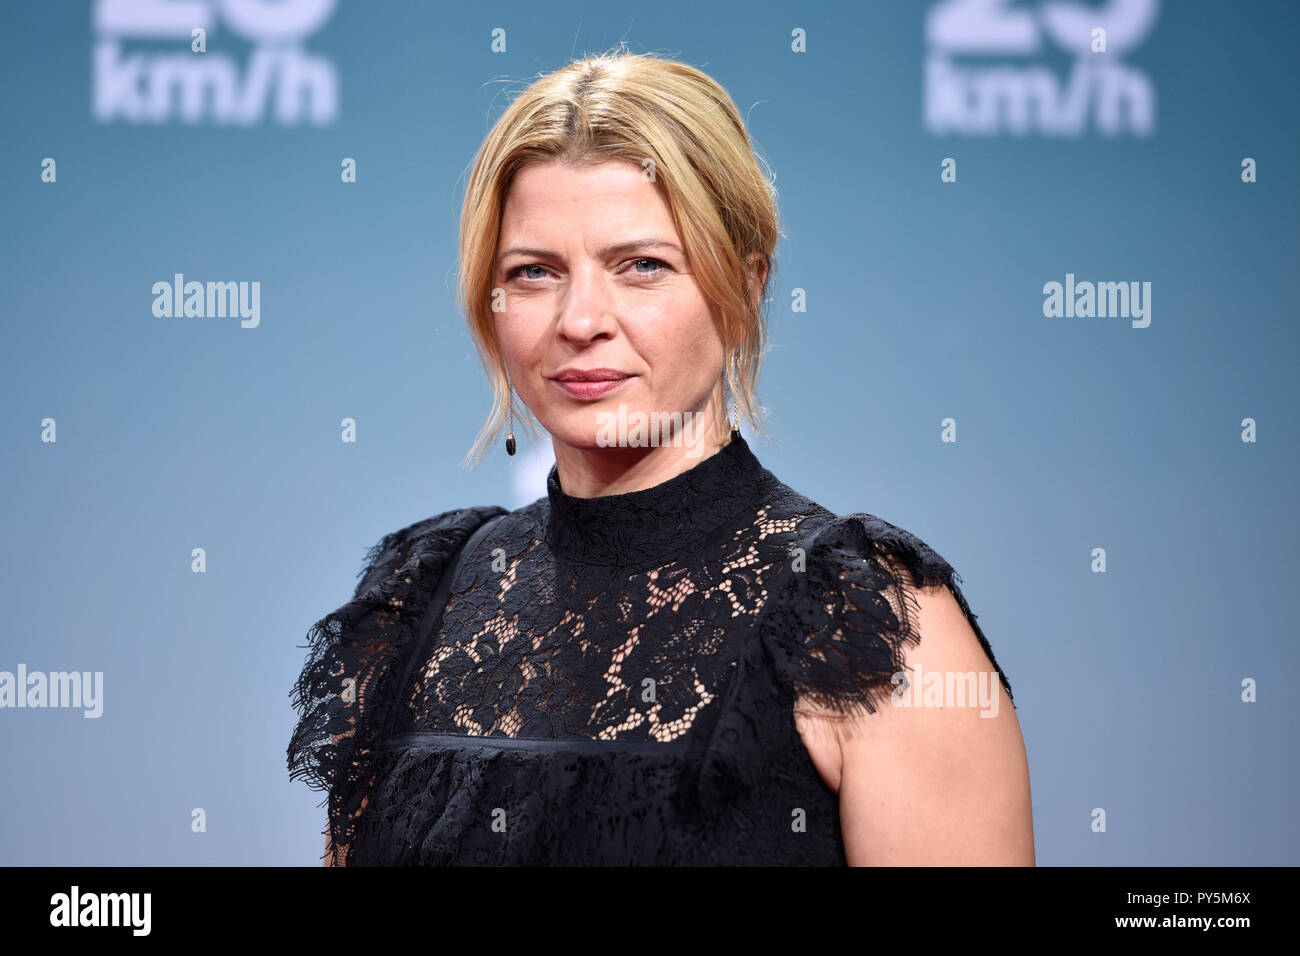 Berlin, Germany. 25th Oct, 2018. The actress Jördis Triebel comes to the premiere of the film '25Km/h' over the red carpet. Credit: Gregor Fischer/dpa/Alamy Live News Stock Photo